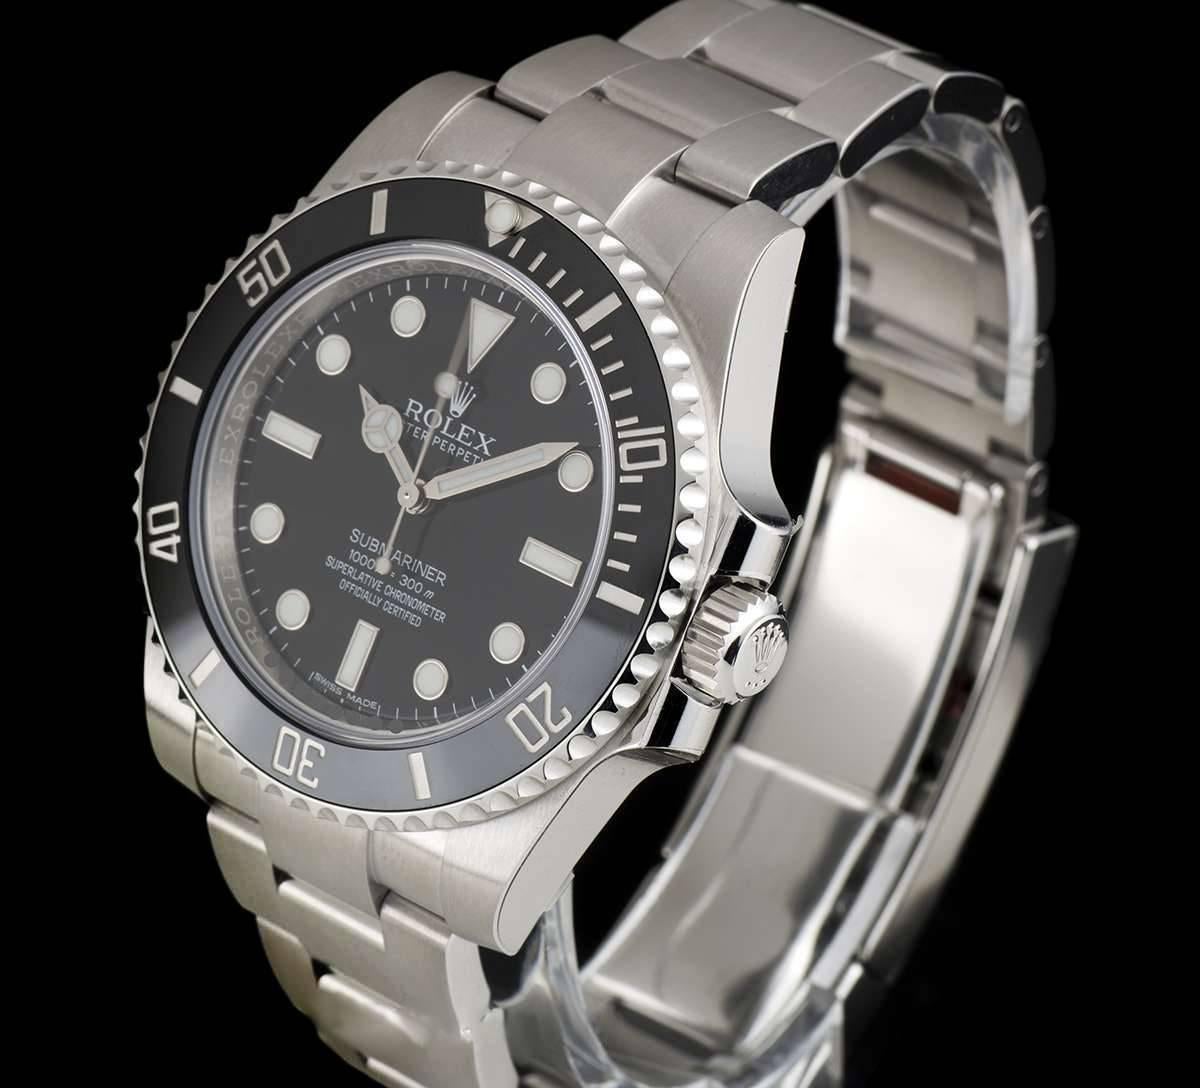 An Unworn Stainless Steel Oyster Perpetual Non-Date Submariner Gents Wristwatch, black dial with applied hour markers, a stainless steel uni-directional rotating bezel with a black ceramic insert, a stainless steel oyster bracelet with a stainless